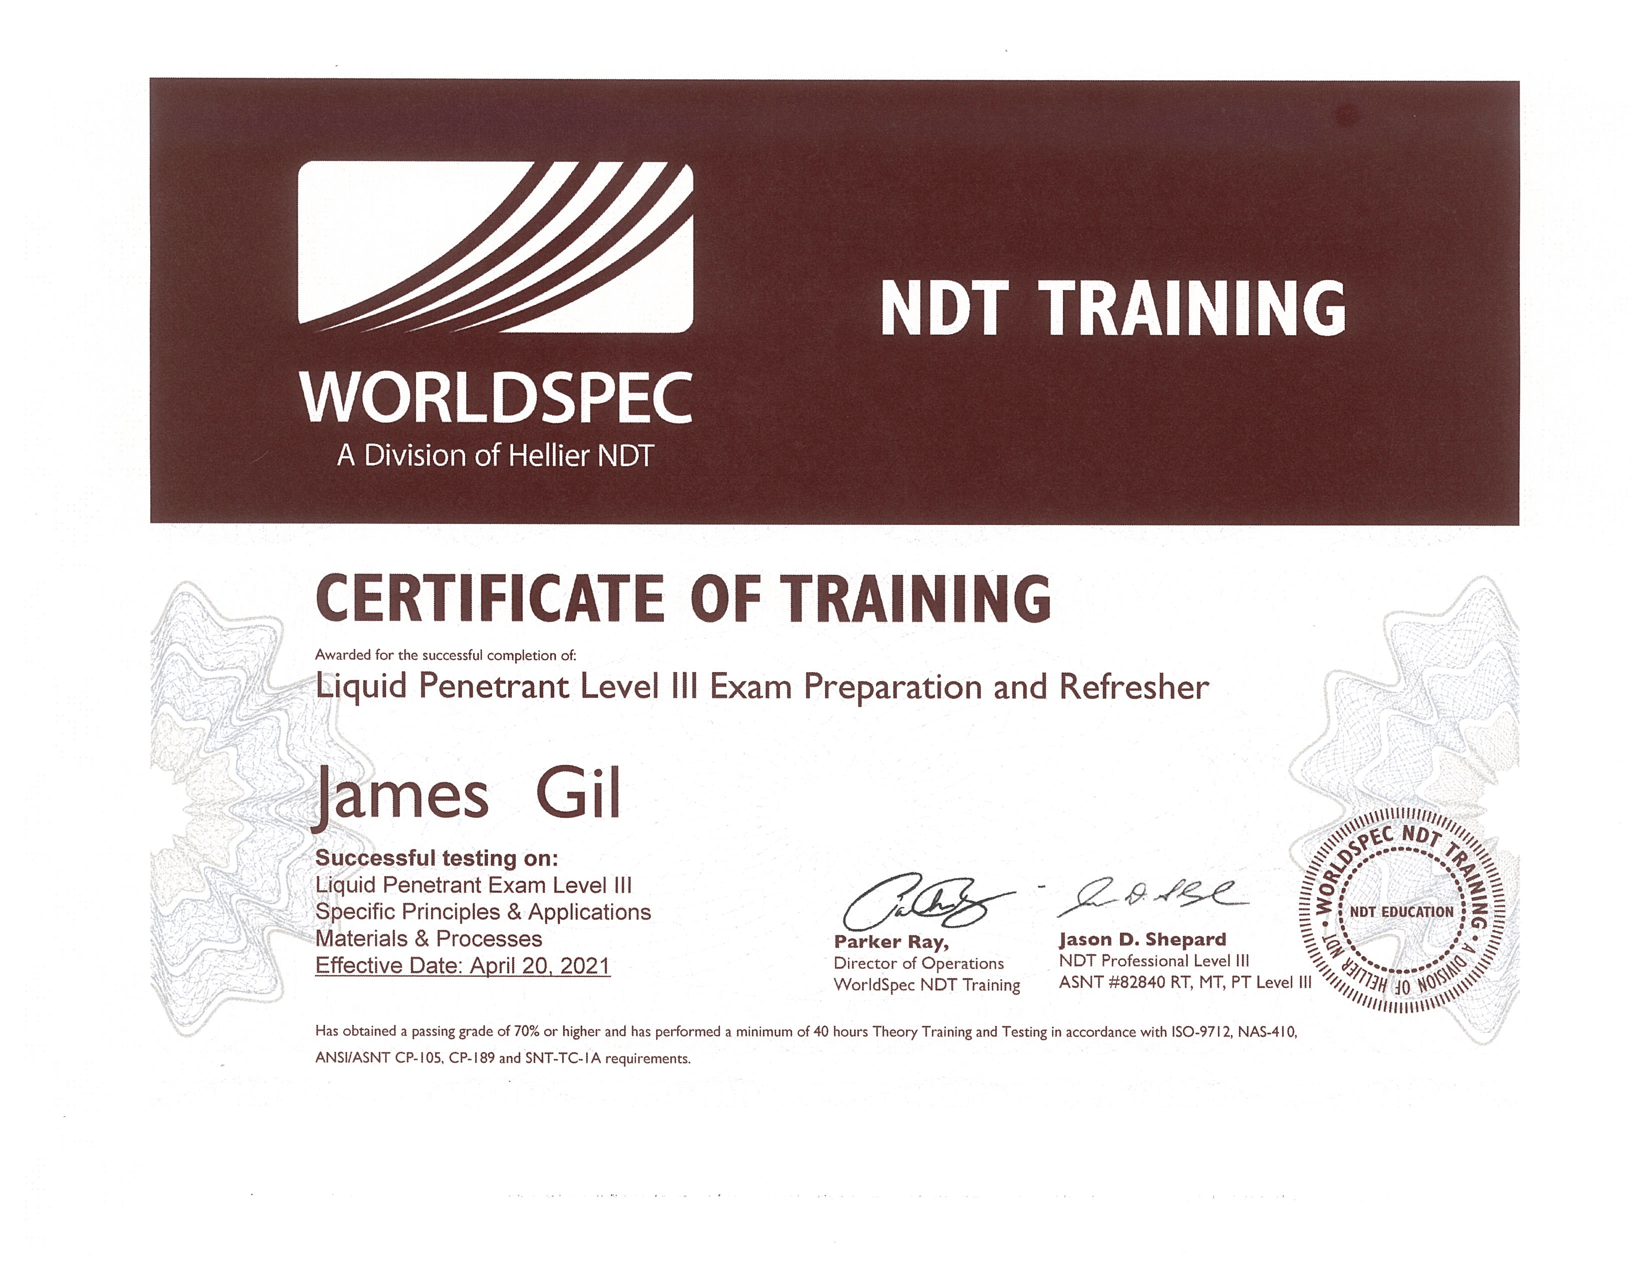 NDT Training Certification